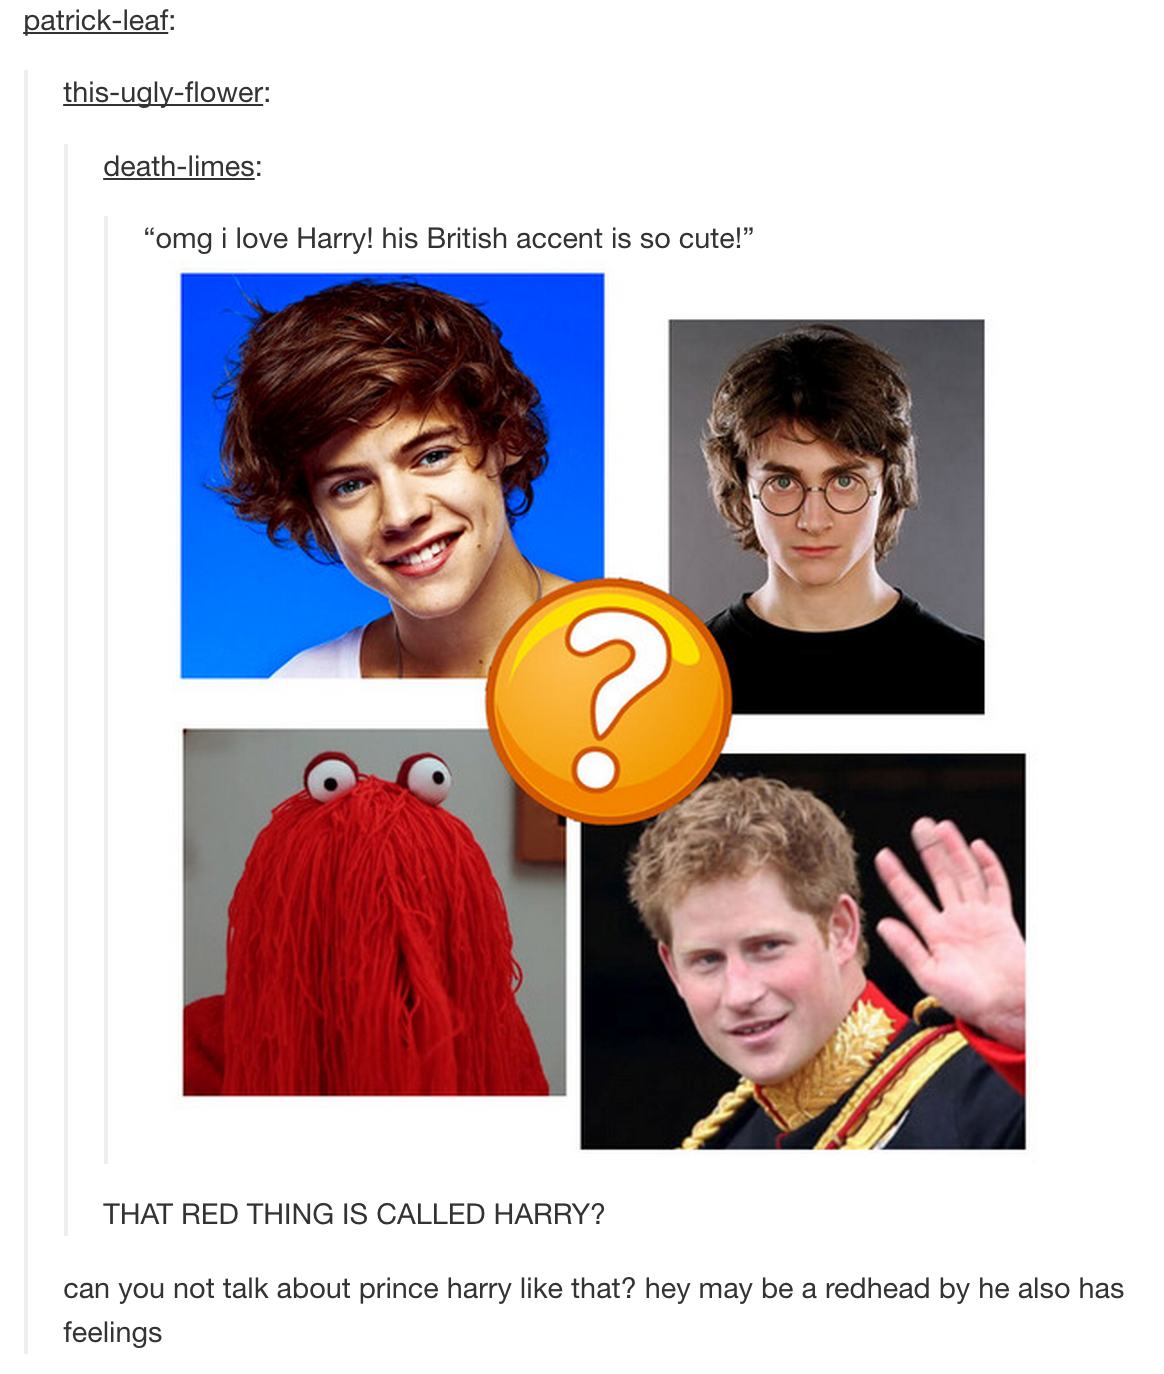 tumblr - harry potter harry styles prince harry - patrickleaf thisuglyflower deathlimes "omg i love Harry! his British accent is so cute! That Red Thing Is Called Harry? can you not talk about prince harry that? hey may be a redhead by he also has feeling